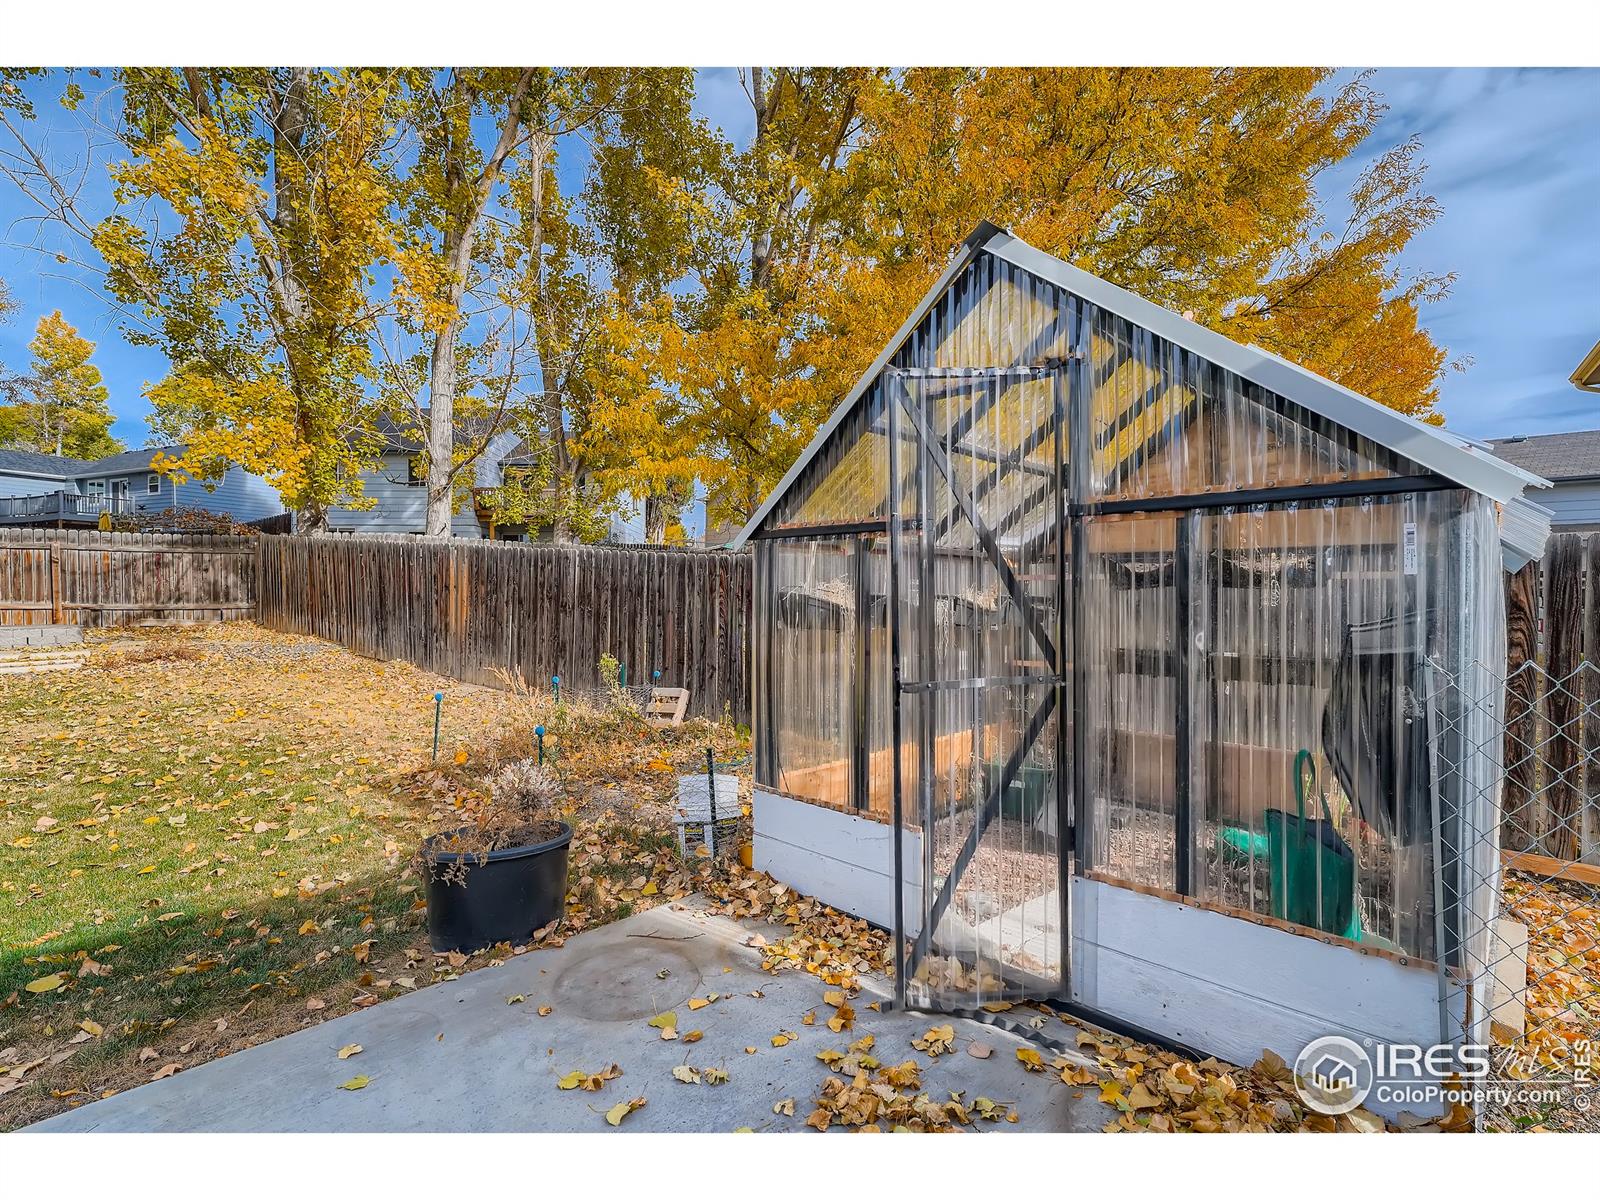 713 Country Acres, Johnstown, CO